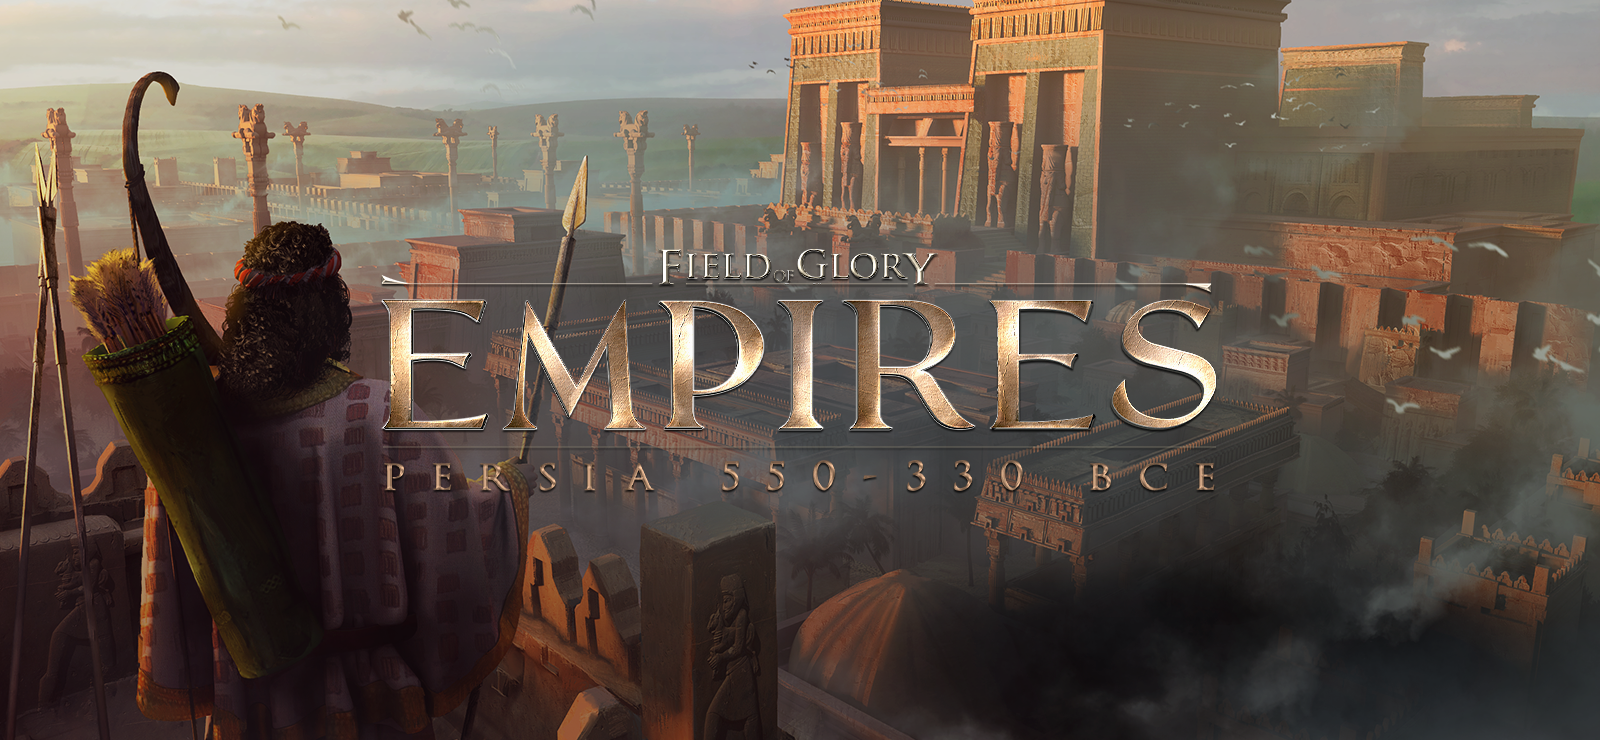 Field Of Glory: Empires - Persia 550-330 BCE